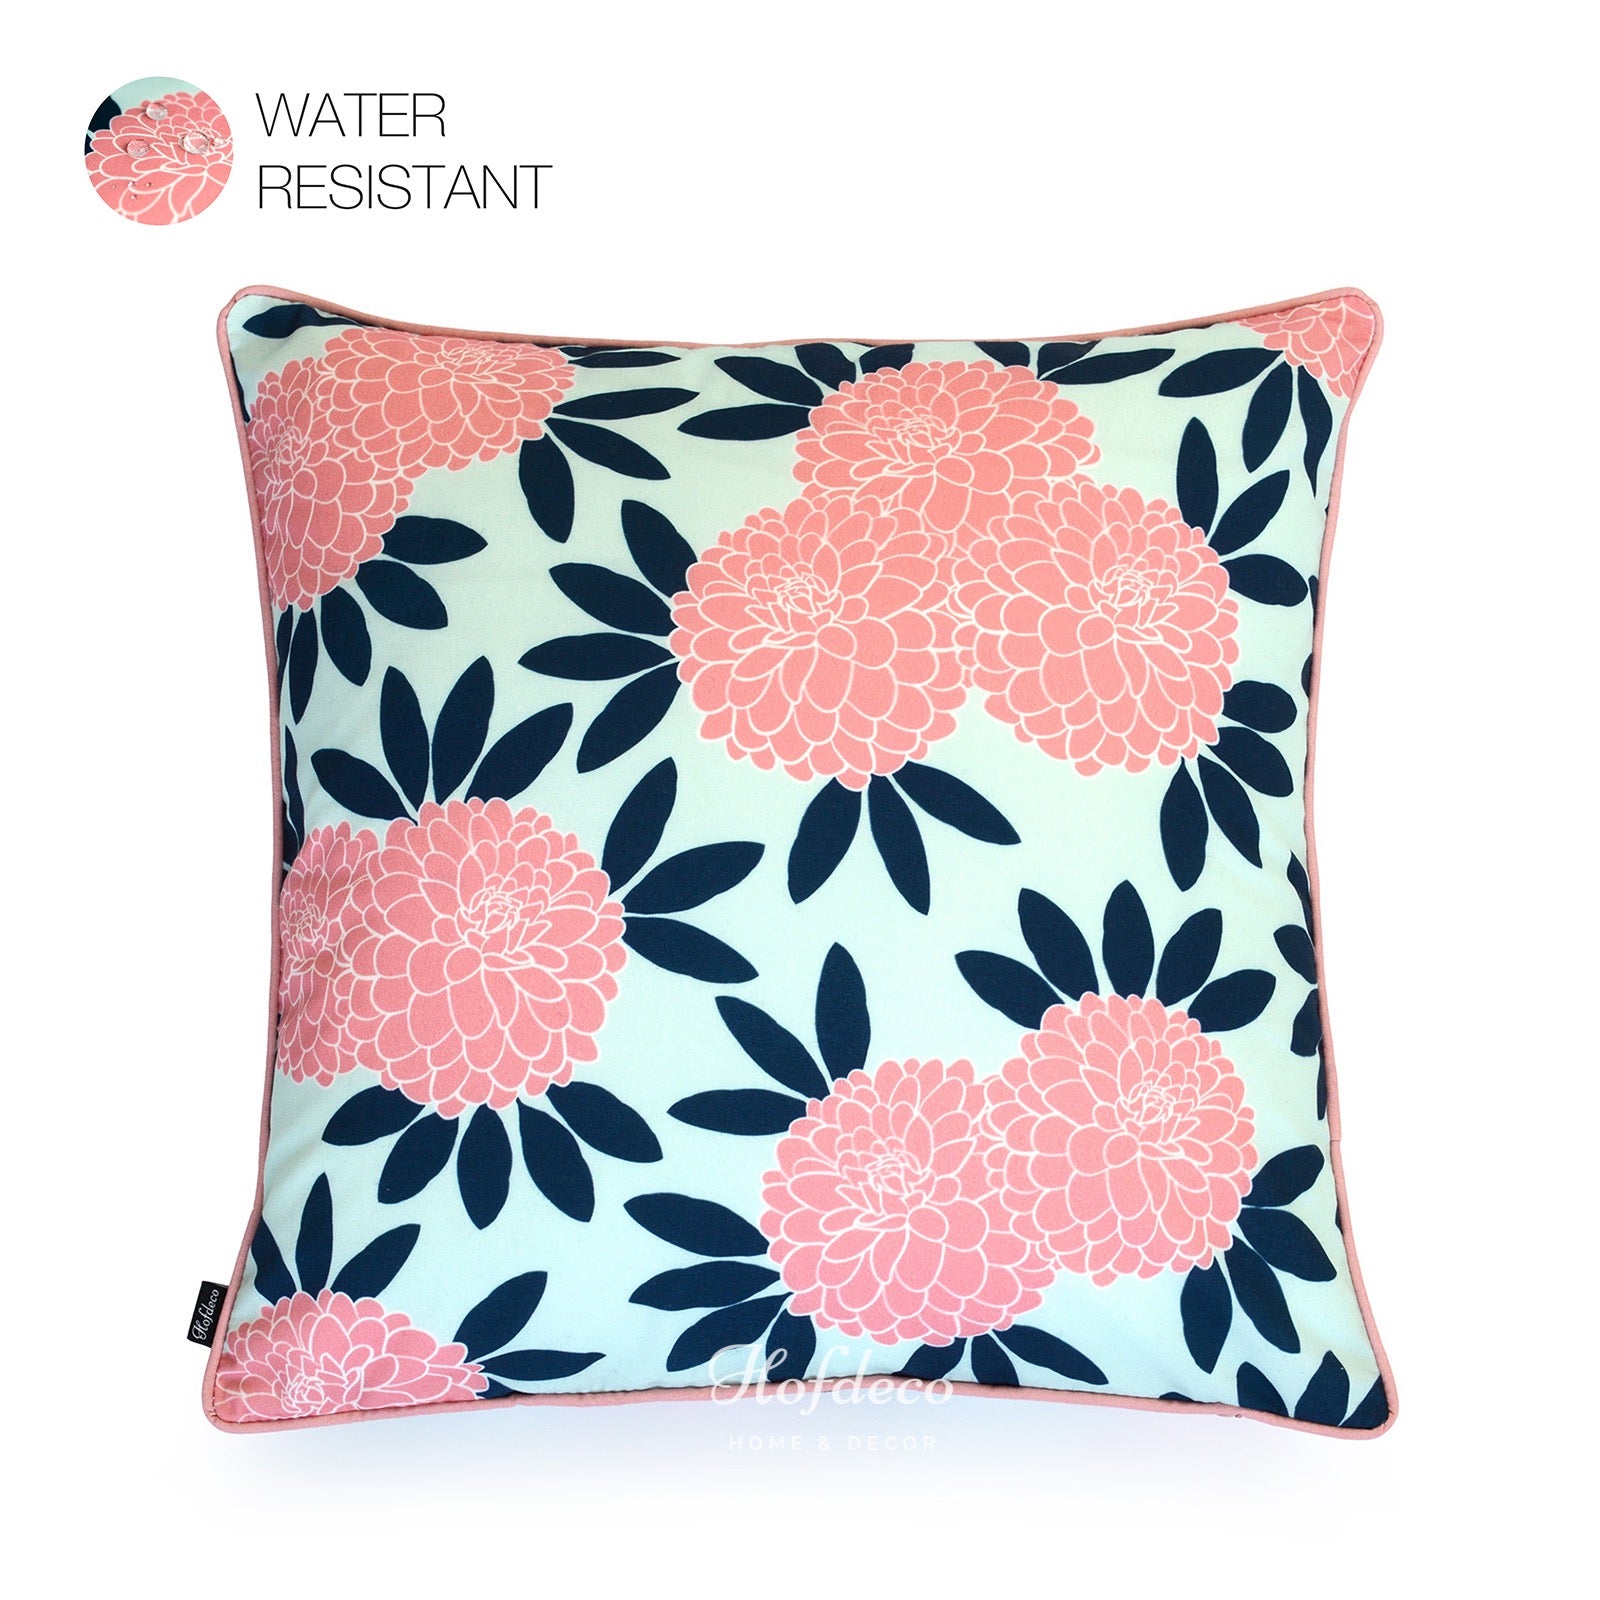 Chinoiserie Floral Outdoor Pillow Cover, Navy Pink, 18"x18"